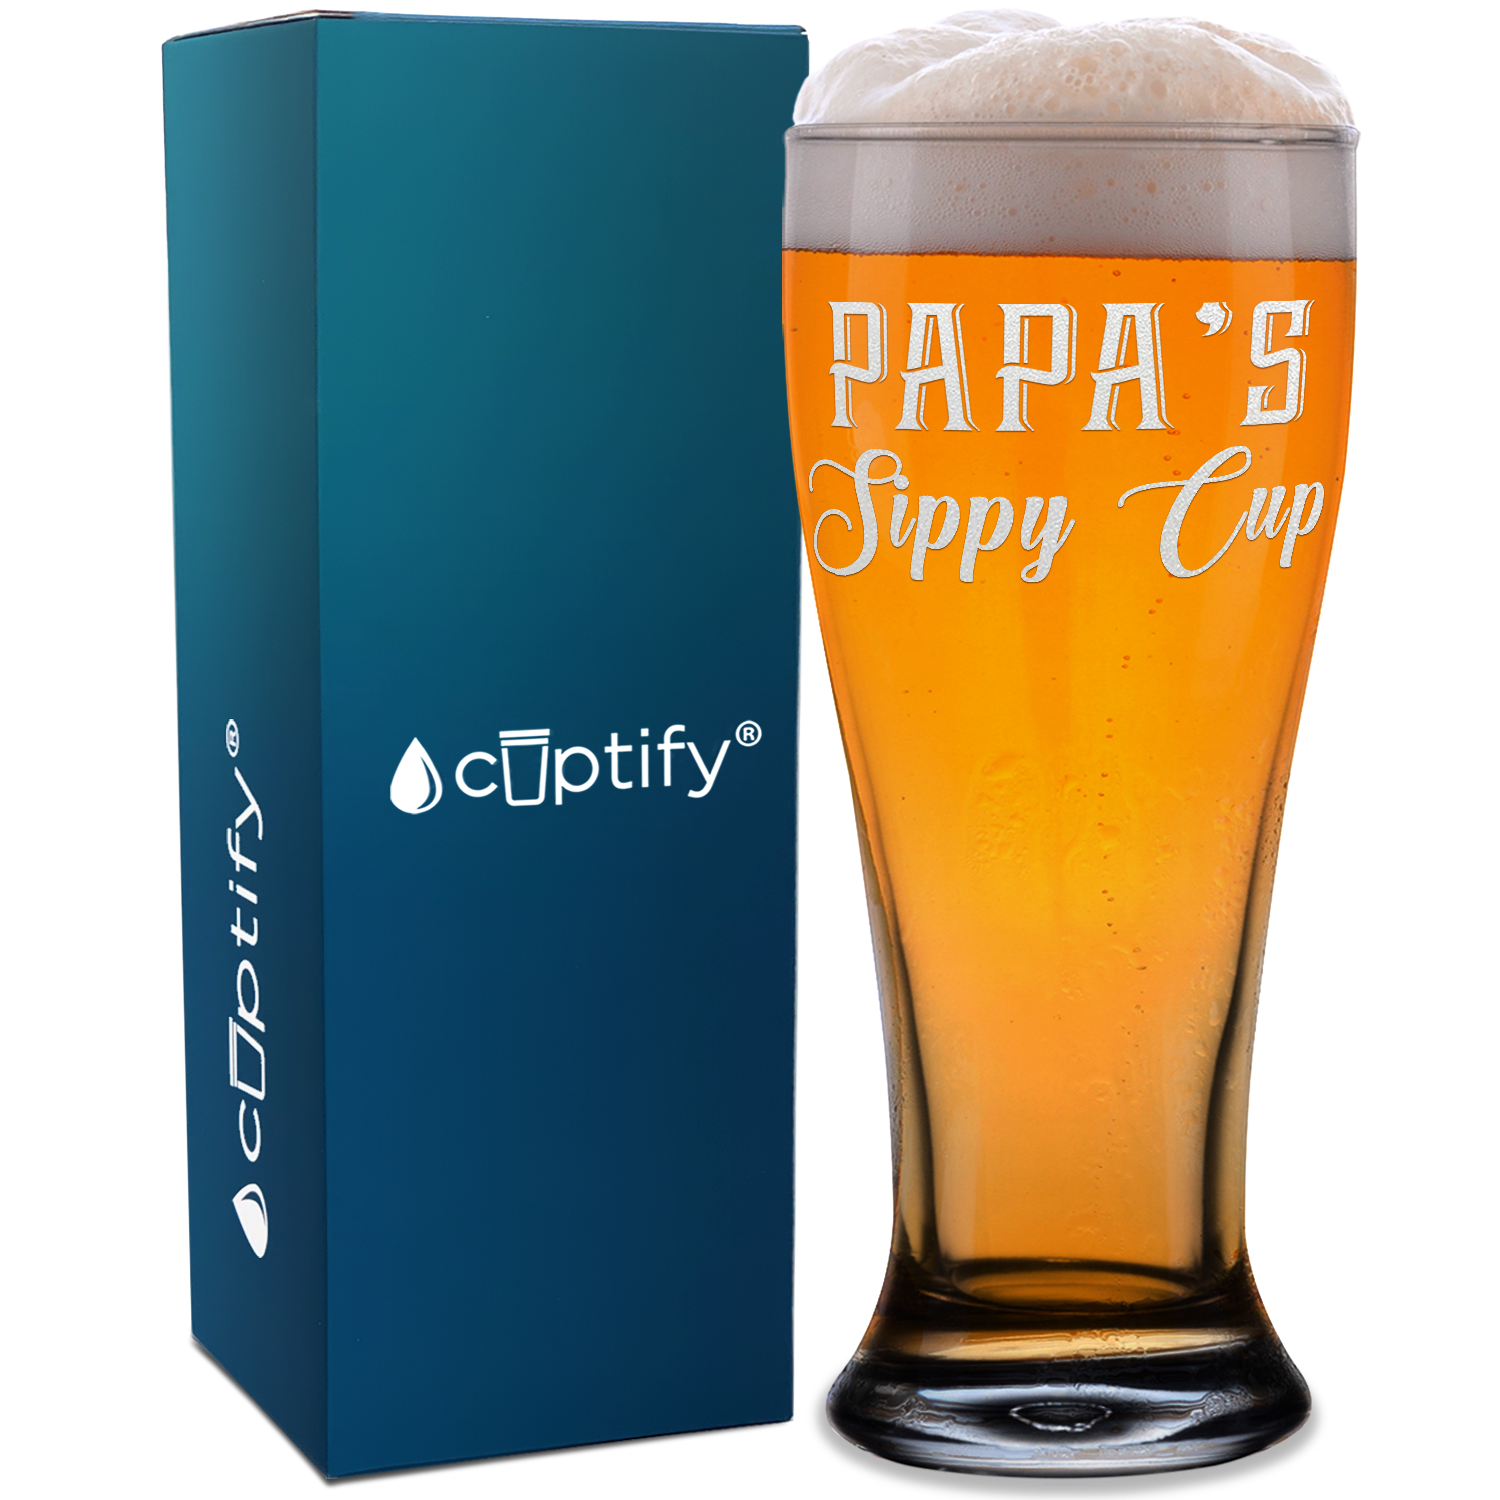 Papa's Sippy Cup Etched on 16 oz Glass Pilsner